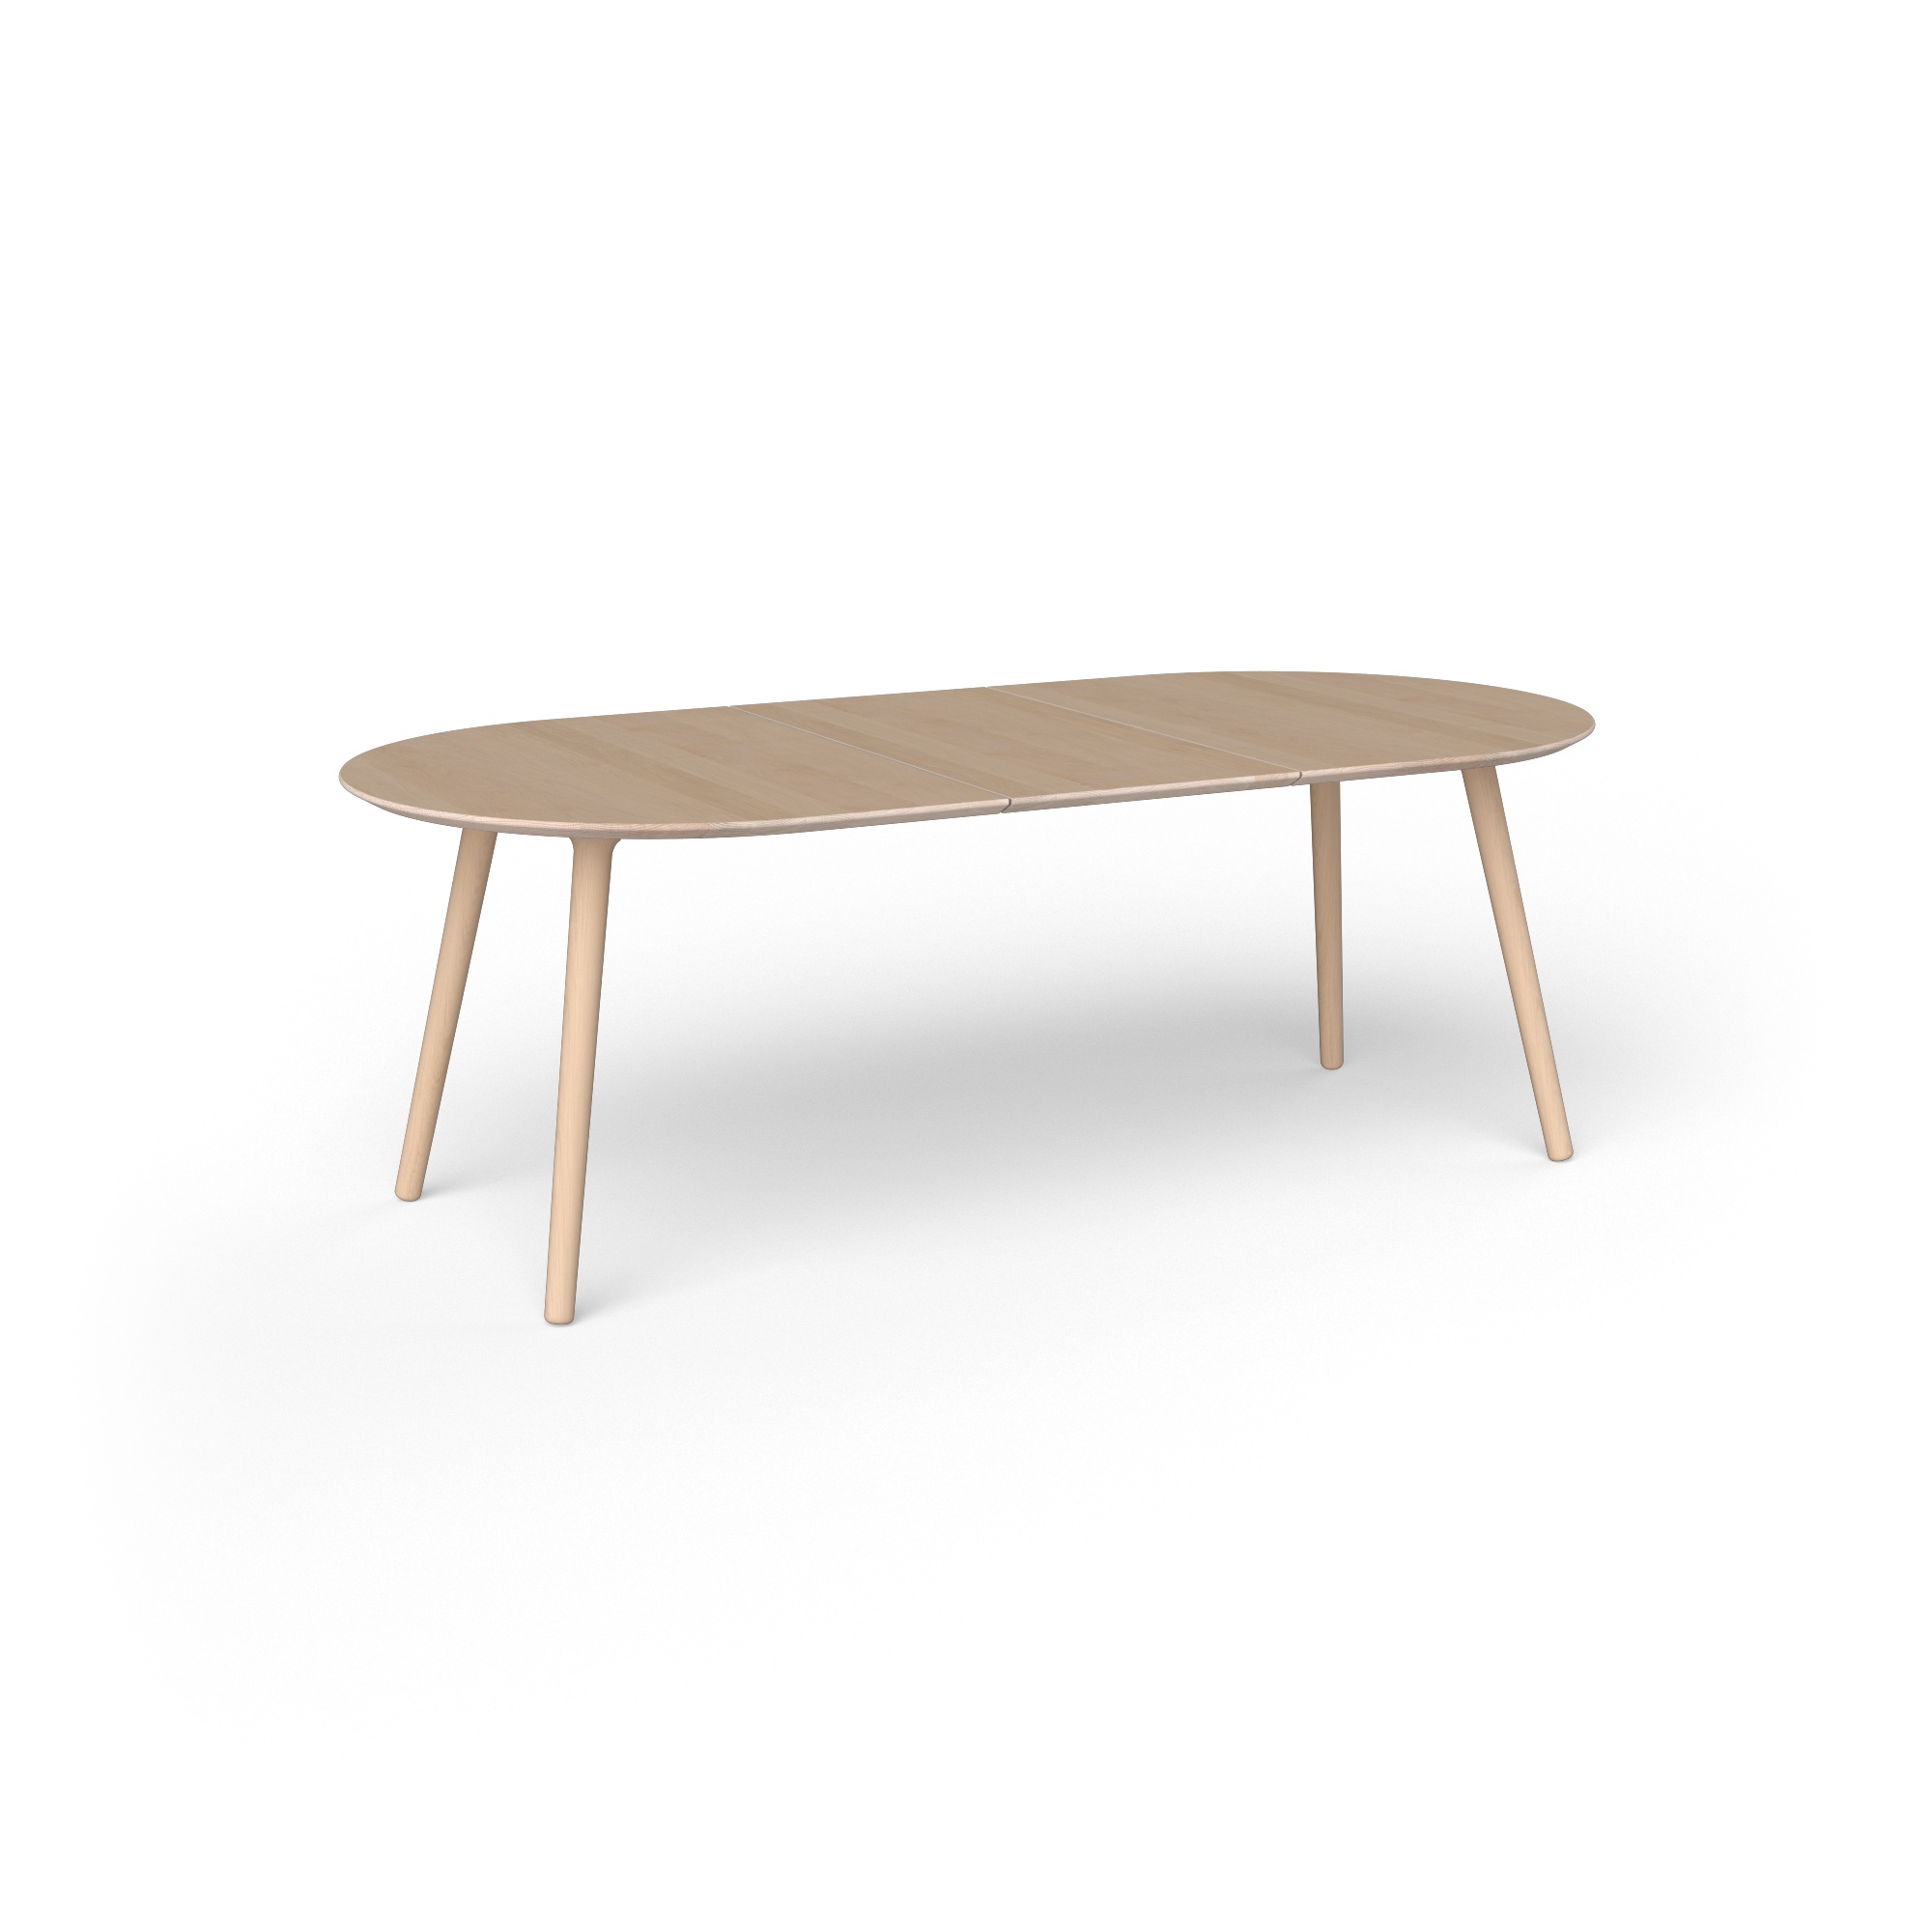 EAT OVAL 160 dining table with 1 leaf - VIA COPENHAGEN